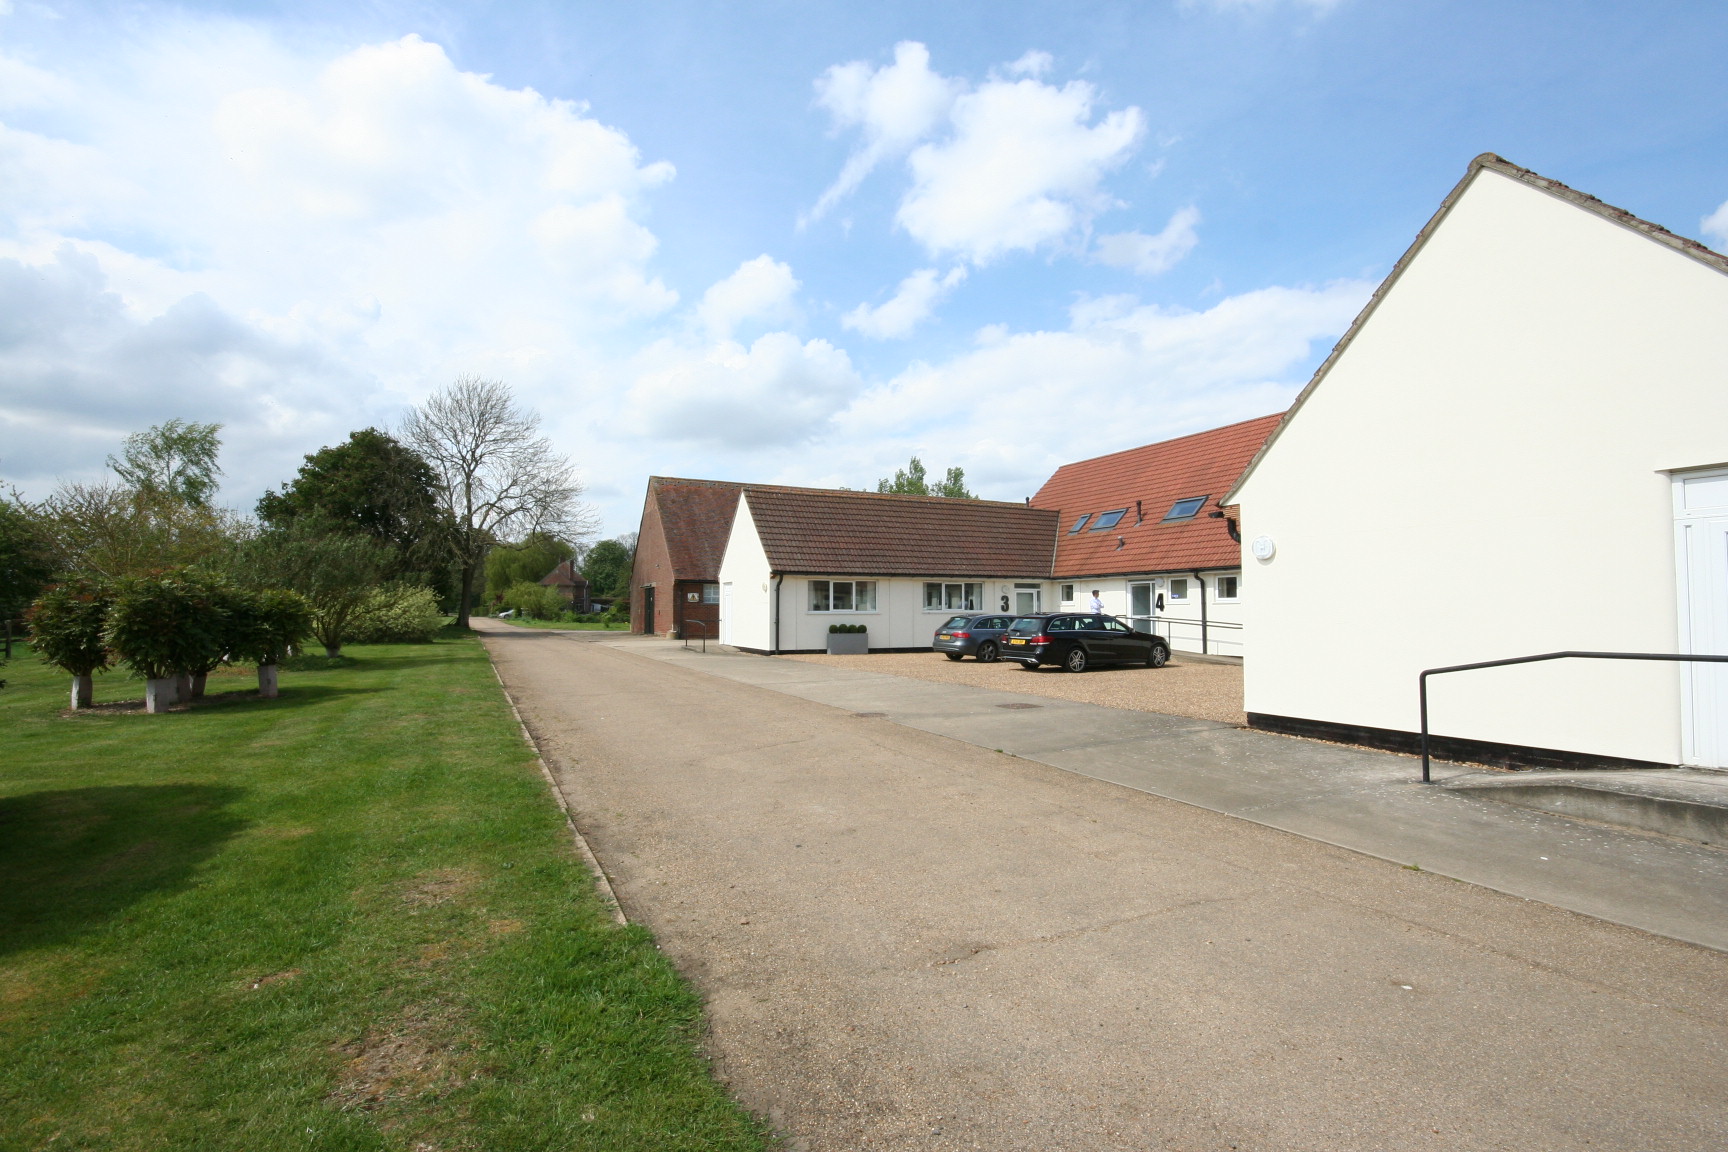 Rural office acquired let and managed